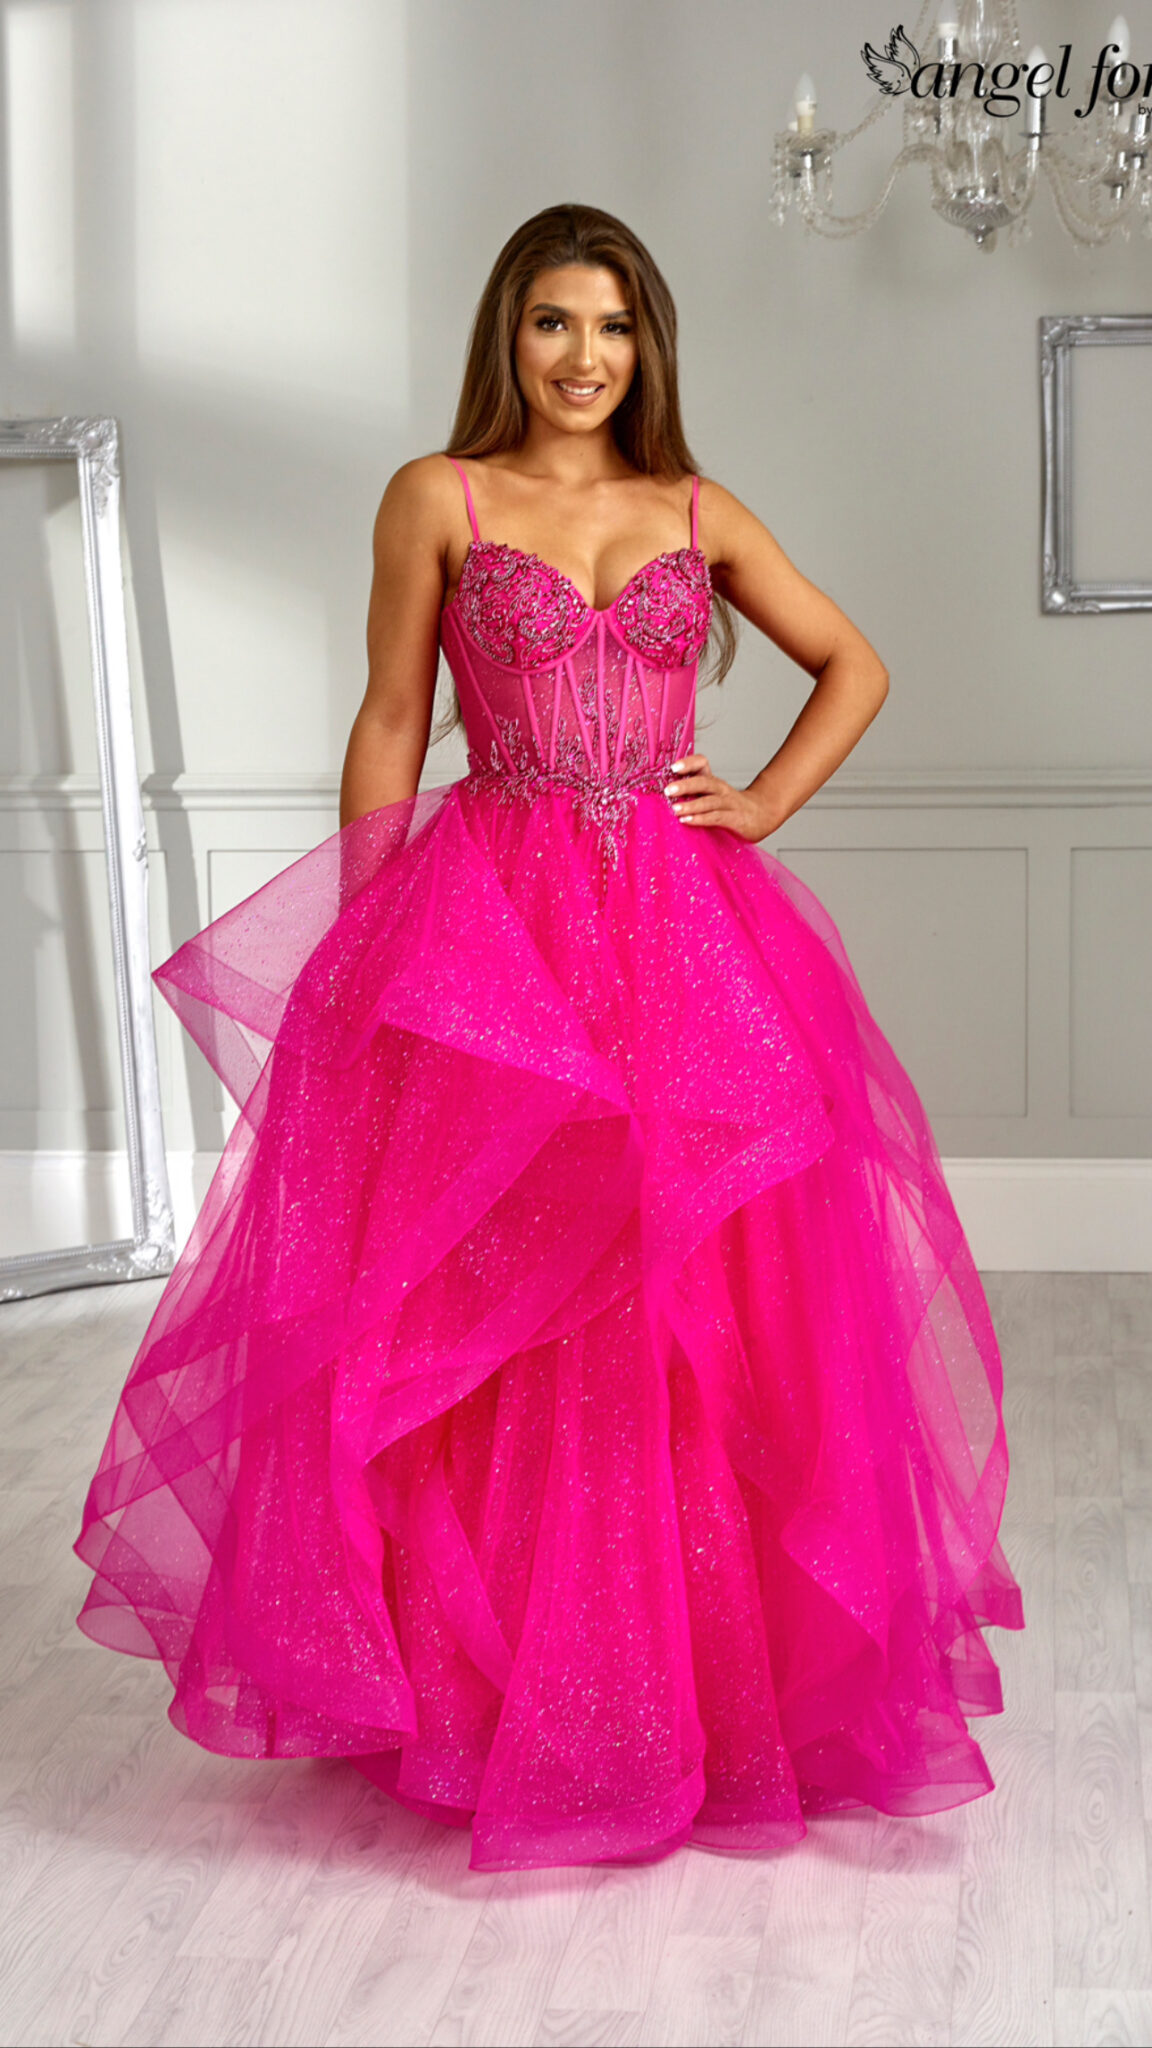 Angel Forever Prom Dresses - Page 6 of 17 - Dress To Go - Prom Dresses ...